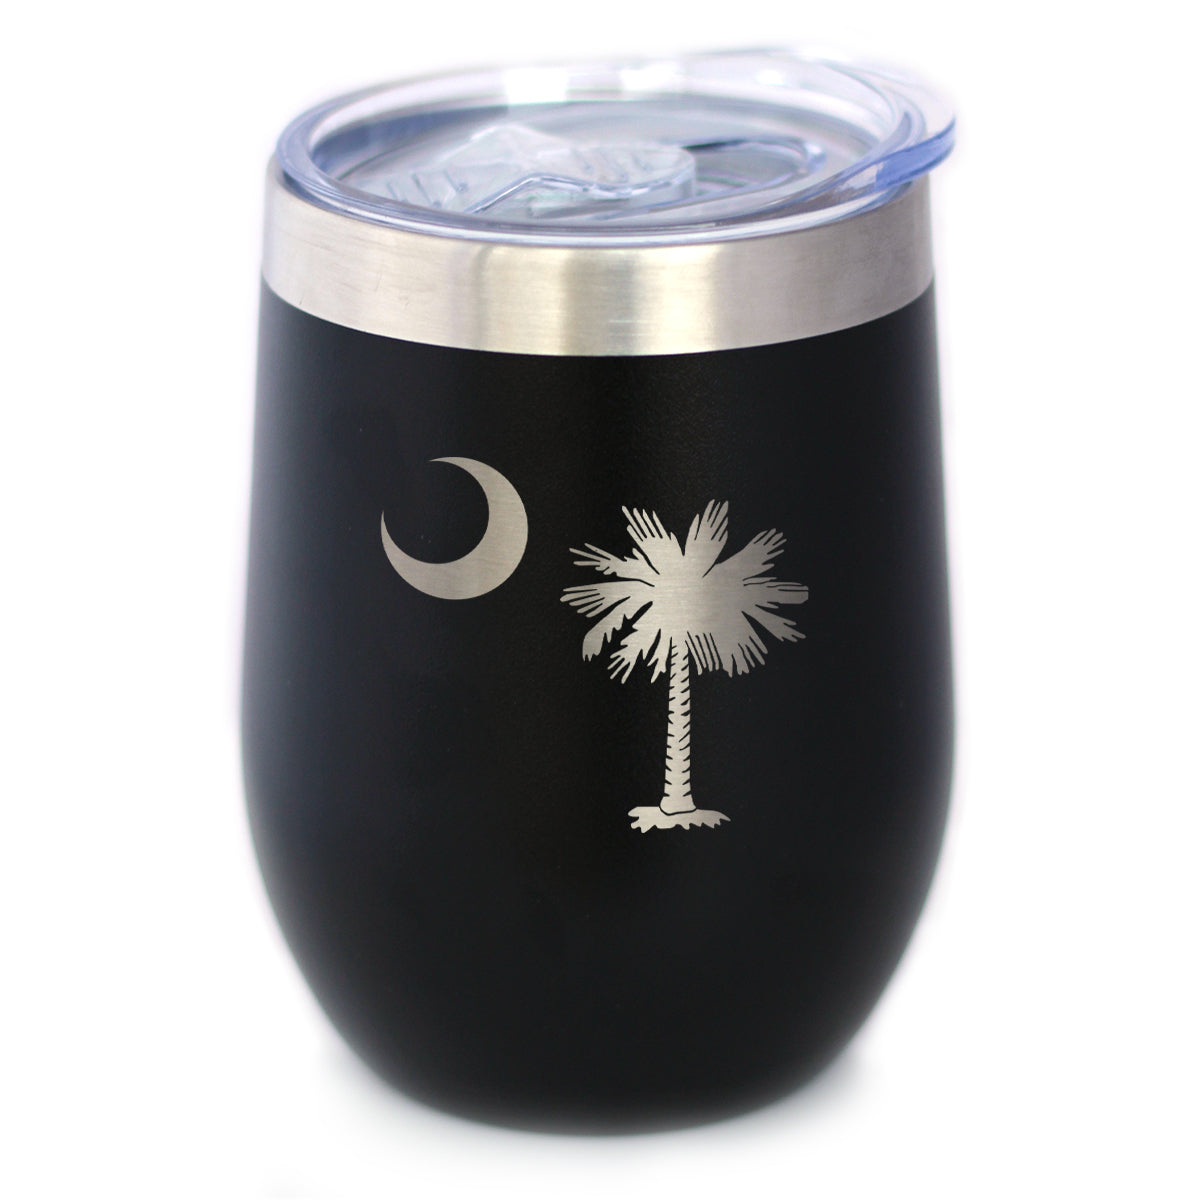 South Carolina Flag - Wine Tumbler Glass with Sliding Lid - Stainless Steel Insulated Mug - State Themed Drinking Decor and Gifts for South Carolinian Women &amp; Men